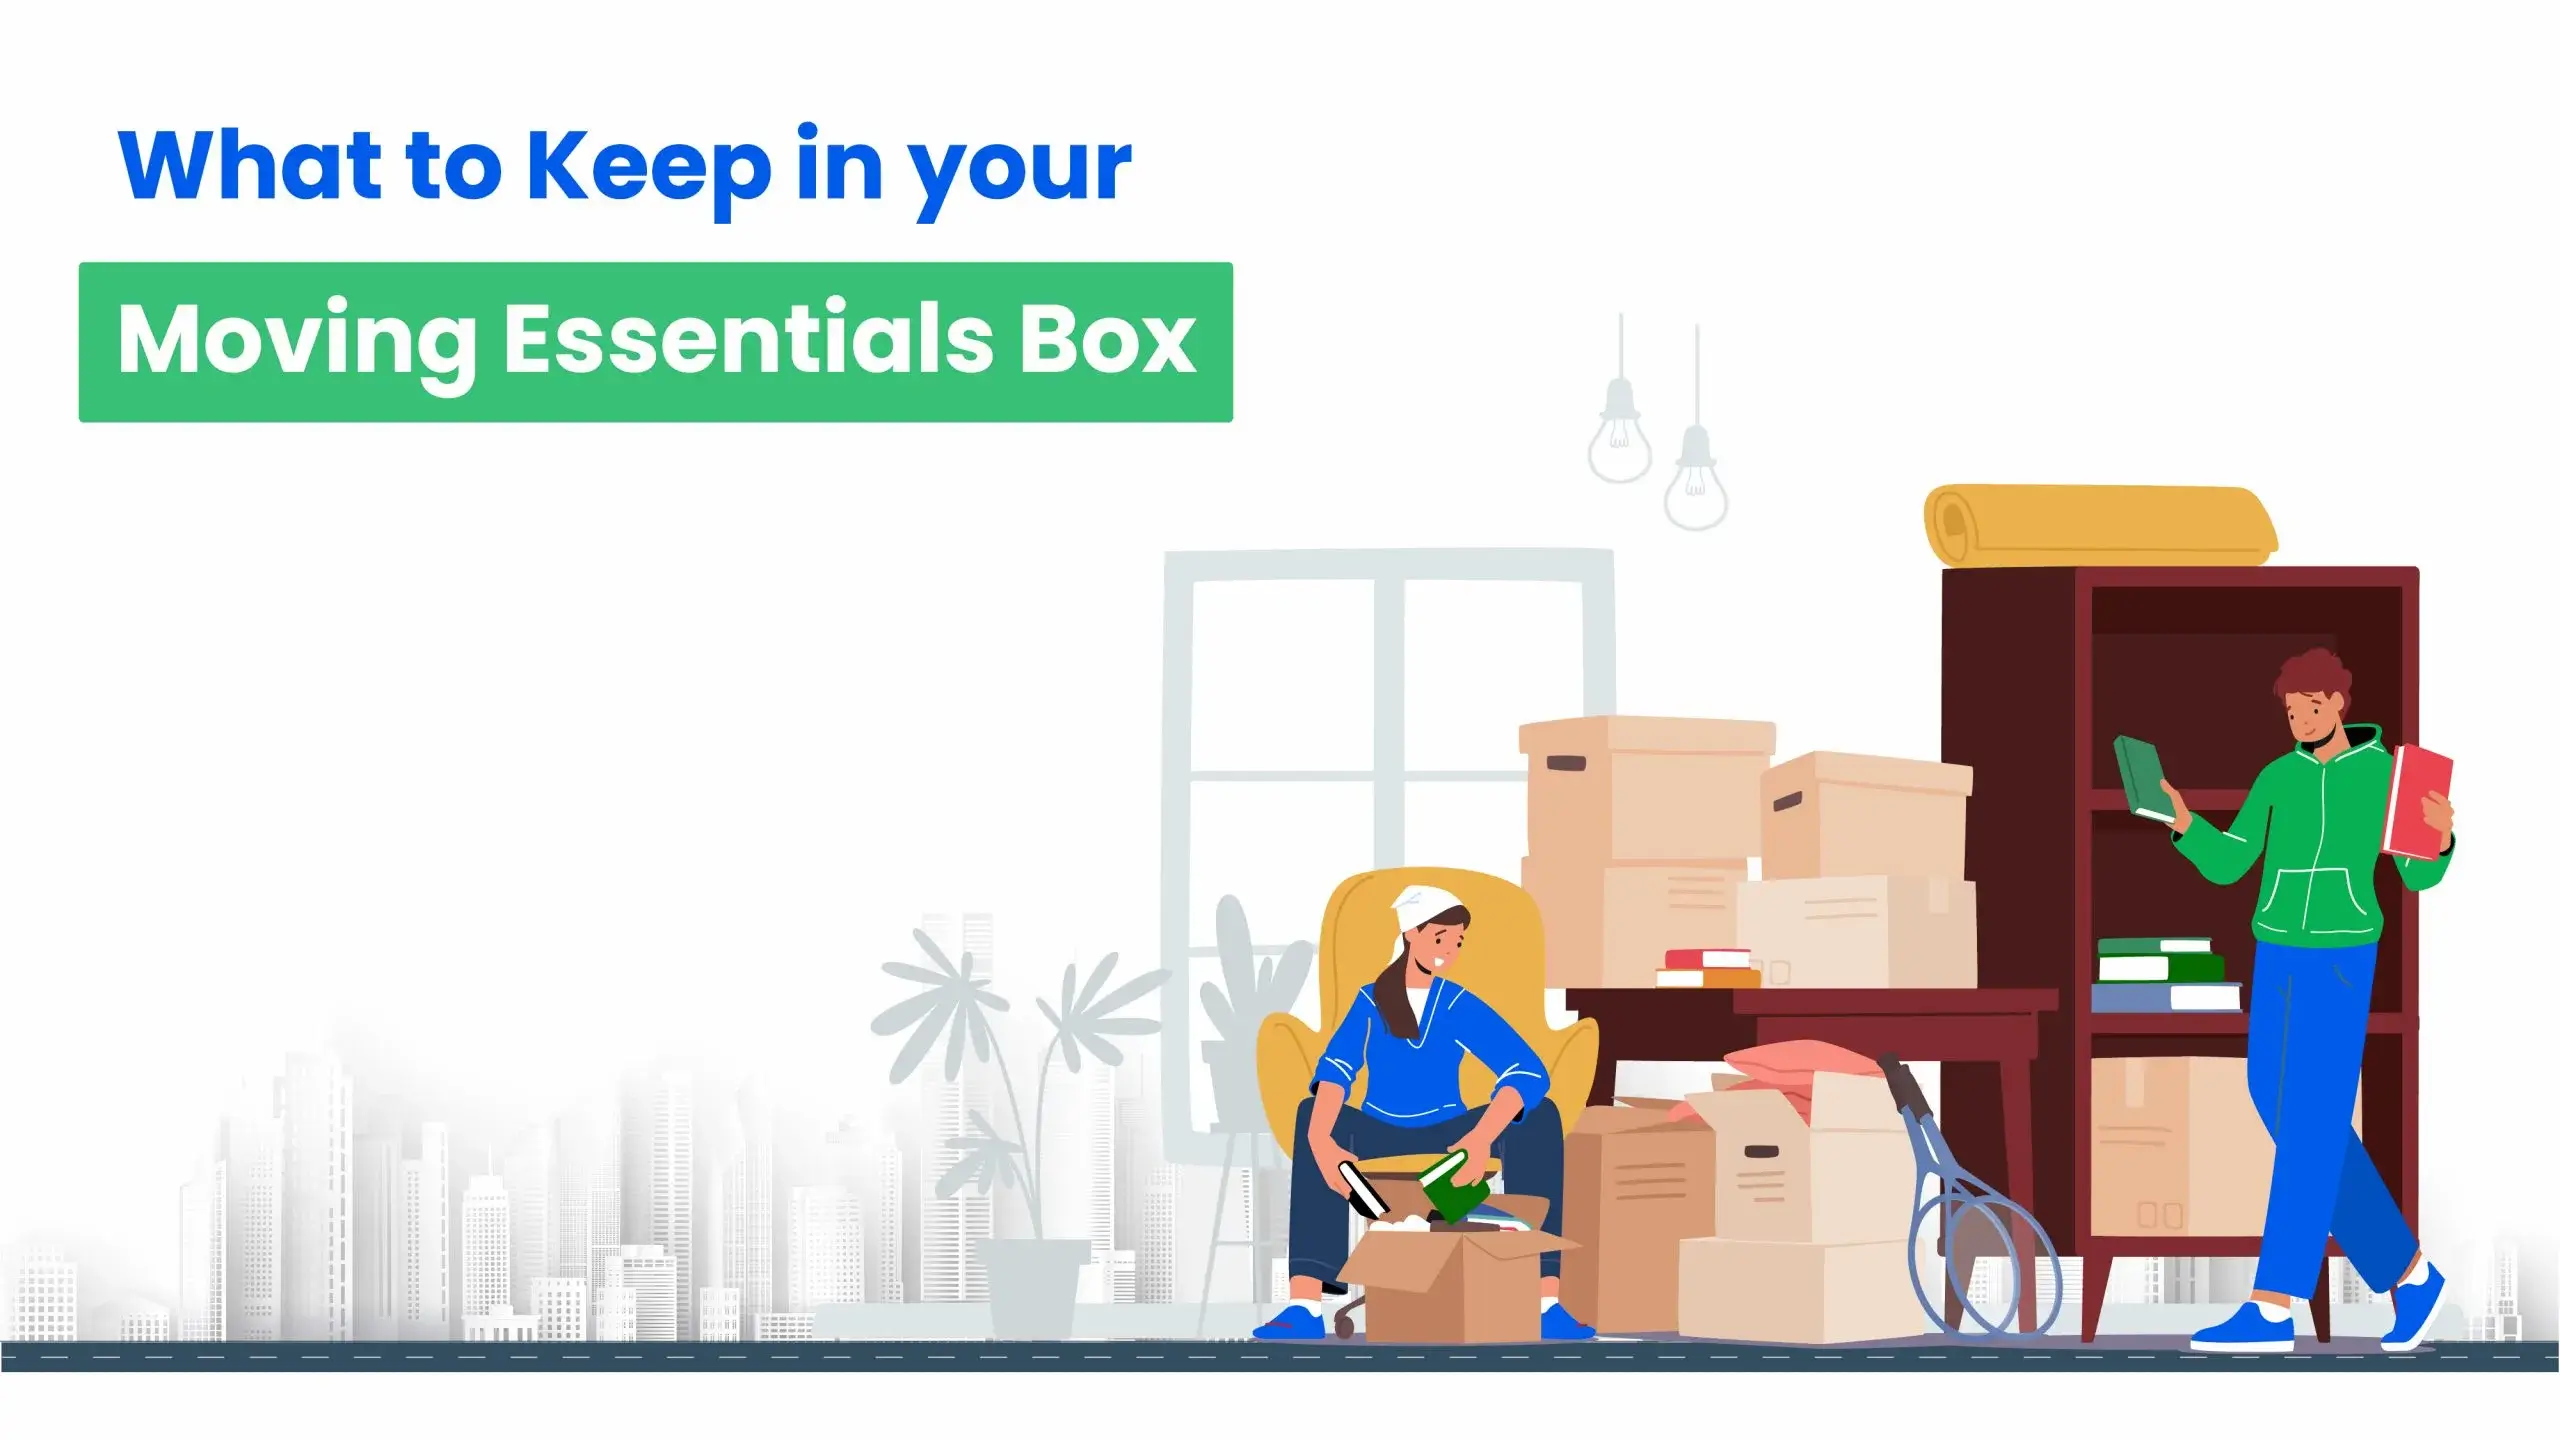 What to Keep in your Moving Essentials Box